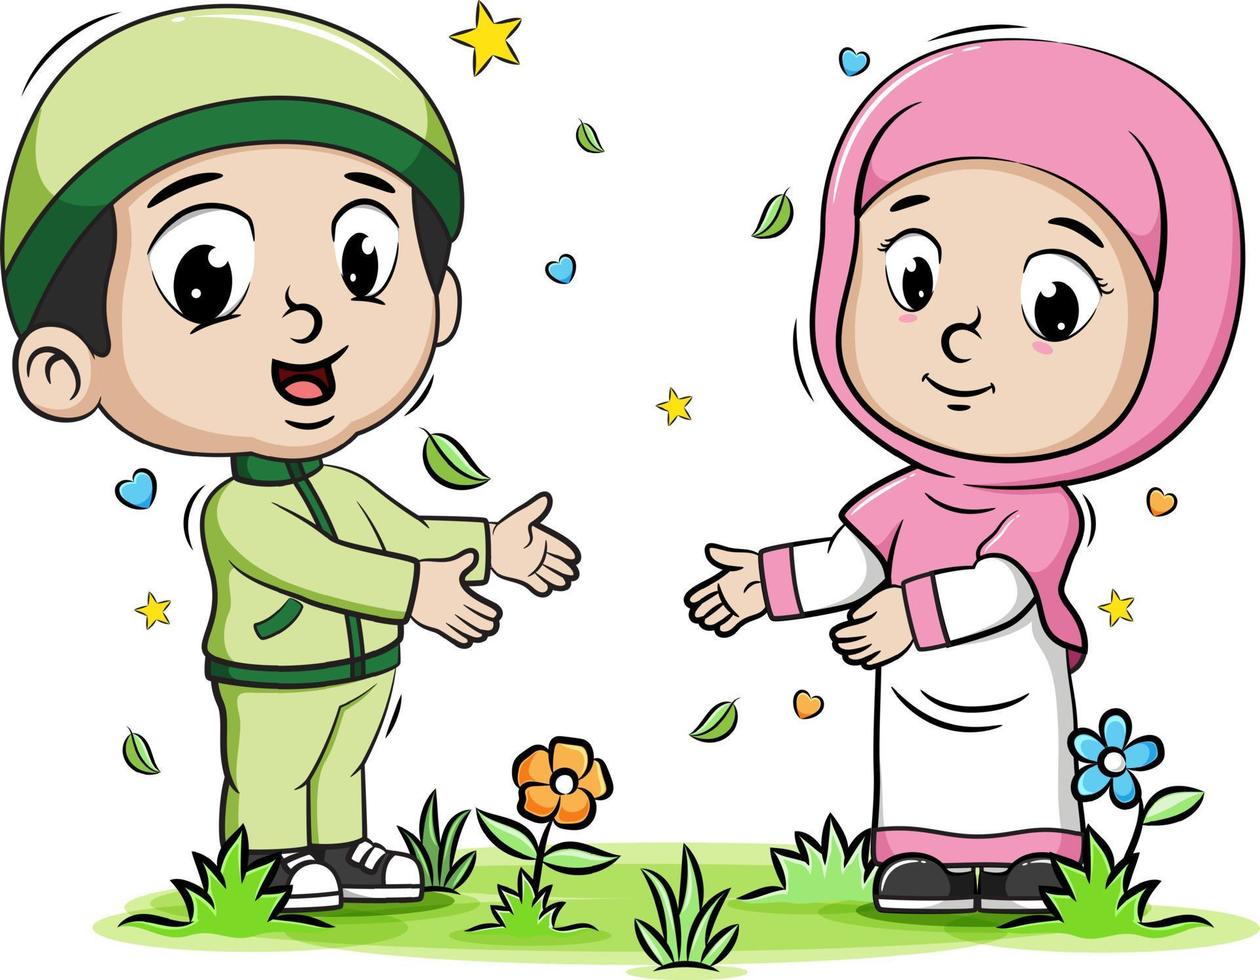 Two Muslim Kids playing in the park vector